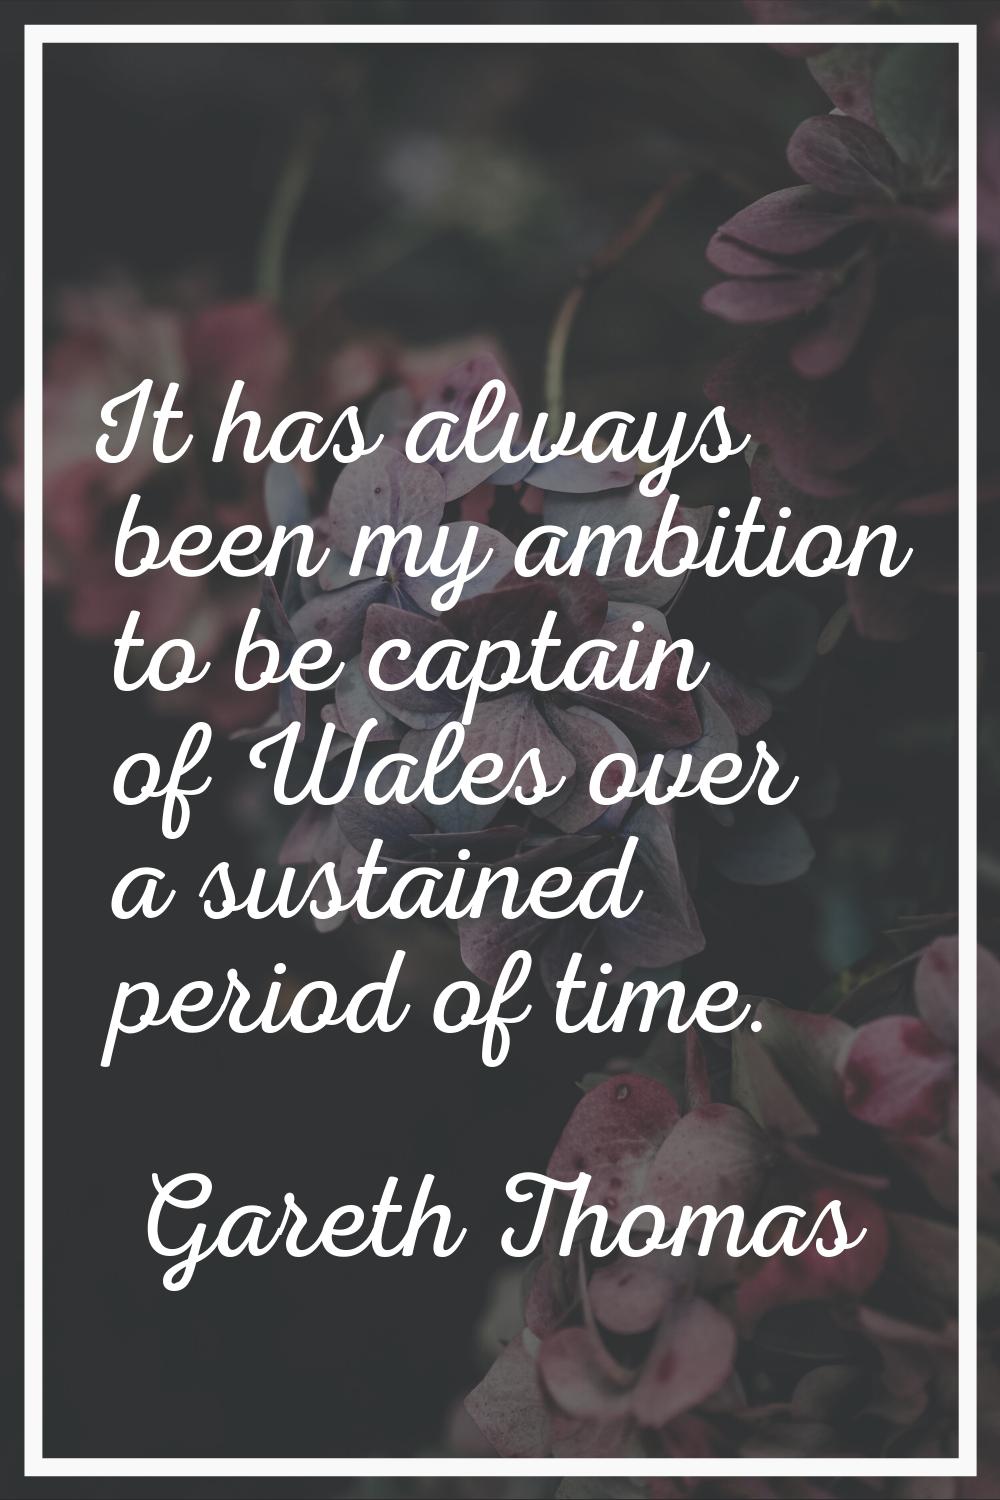 It has always been my ambition to be captain of Wales over a sustained period of time.